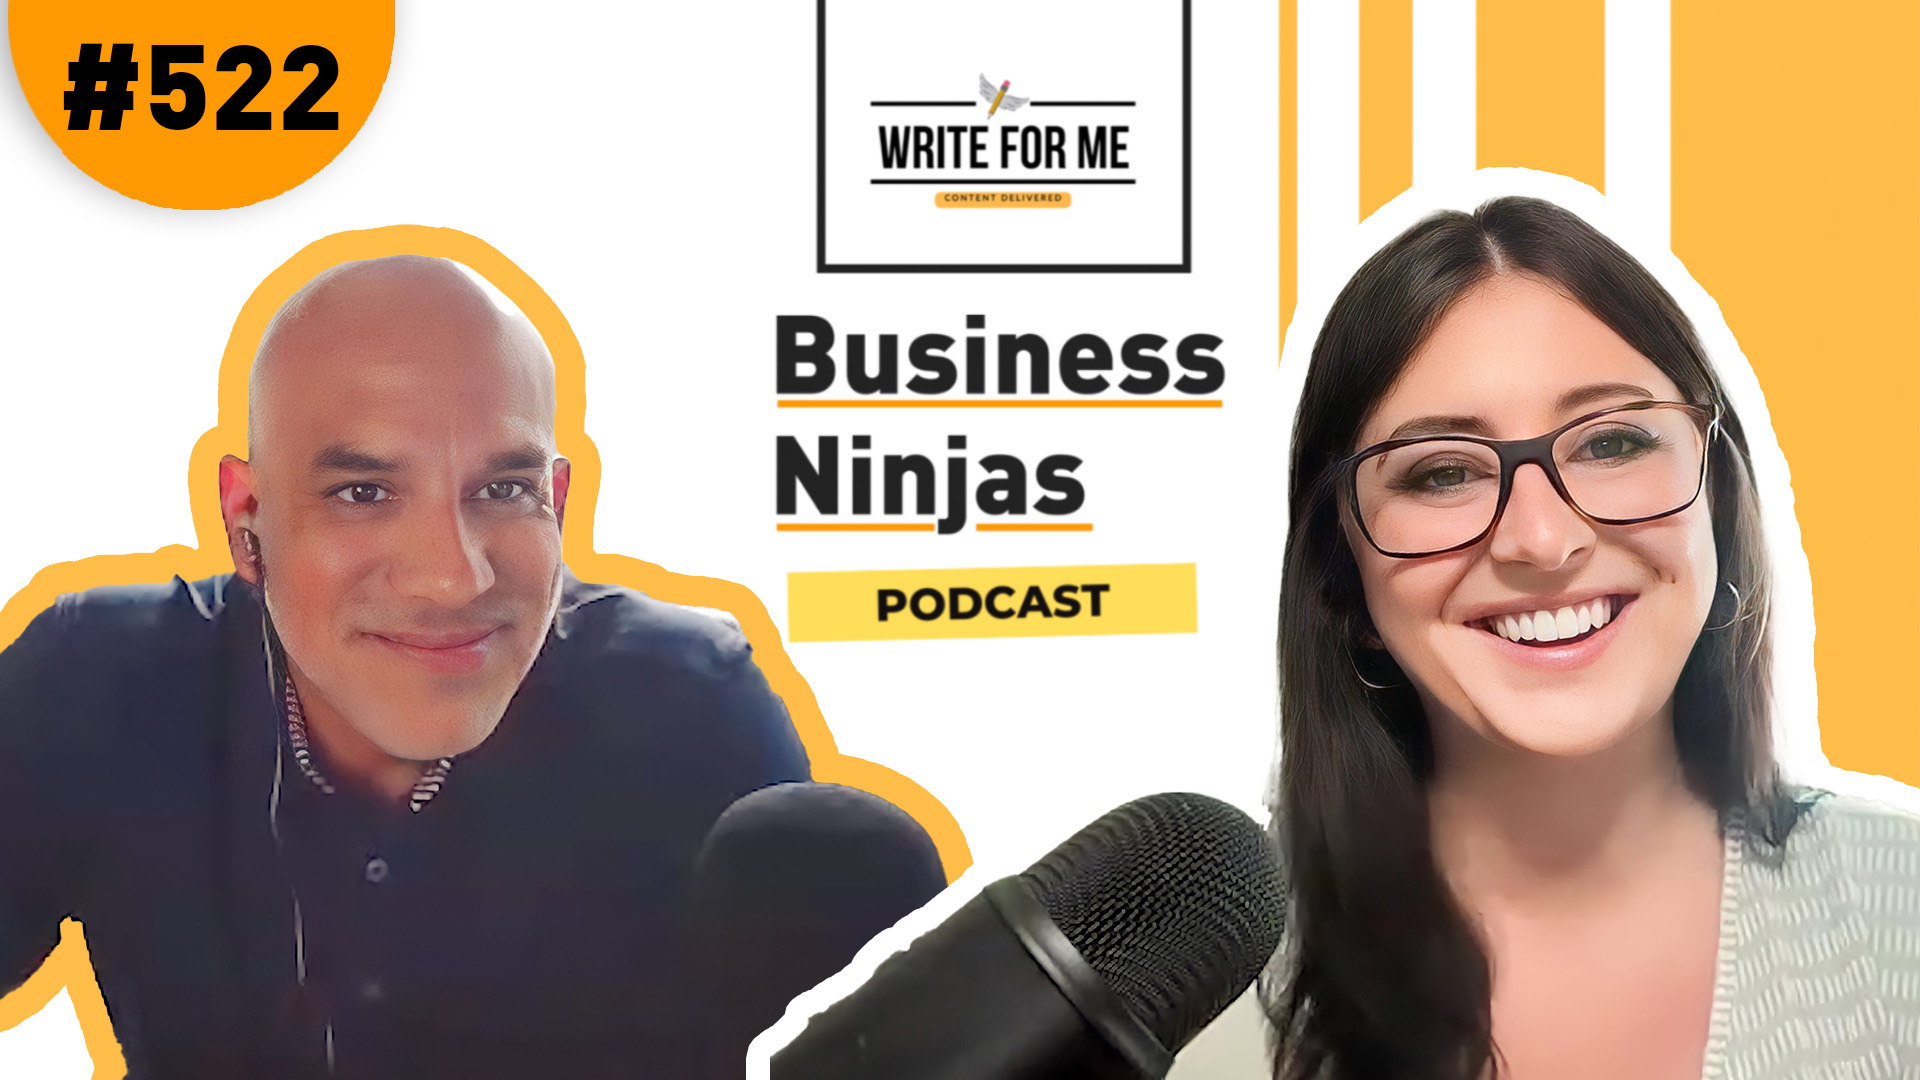 Business Ninjas podcast presents WriteForMe and Reside